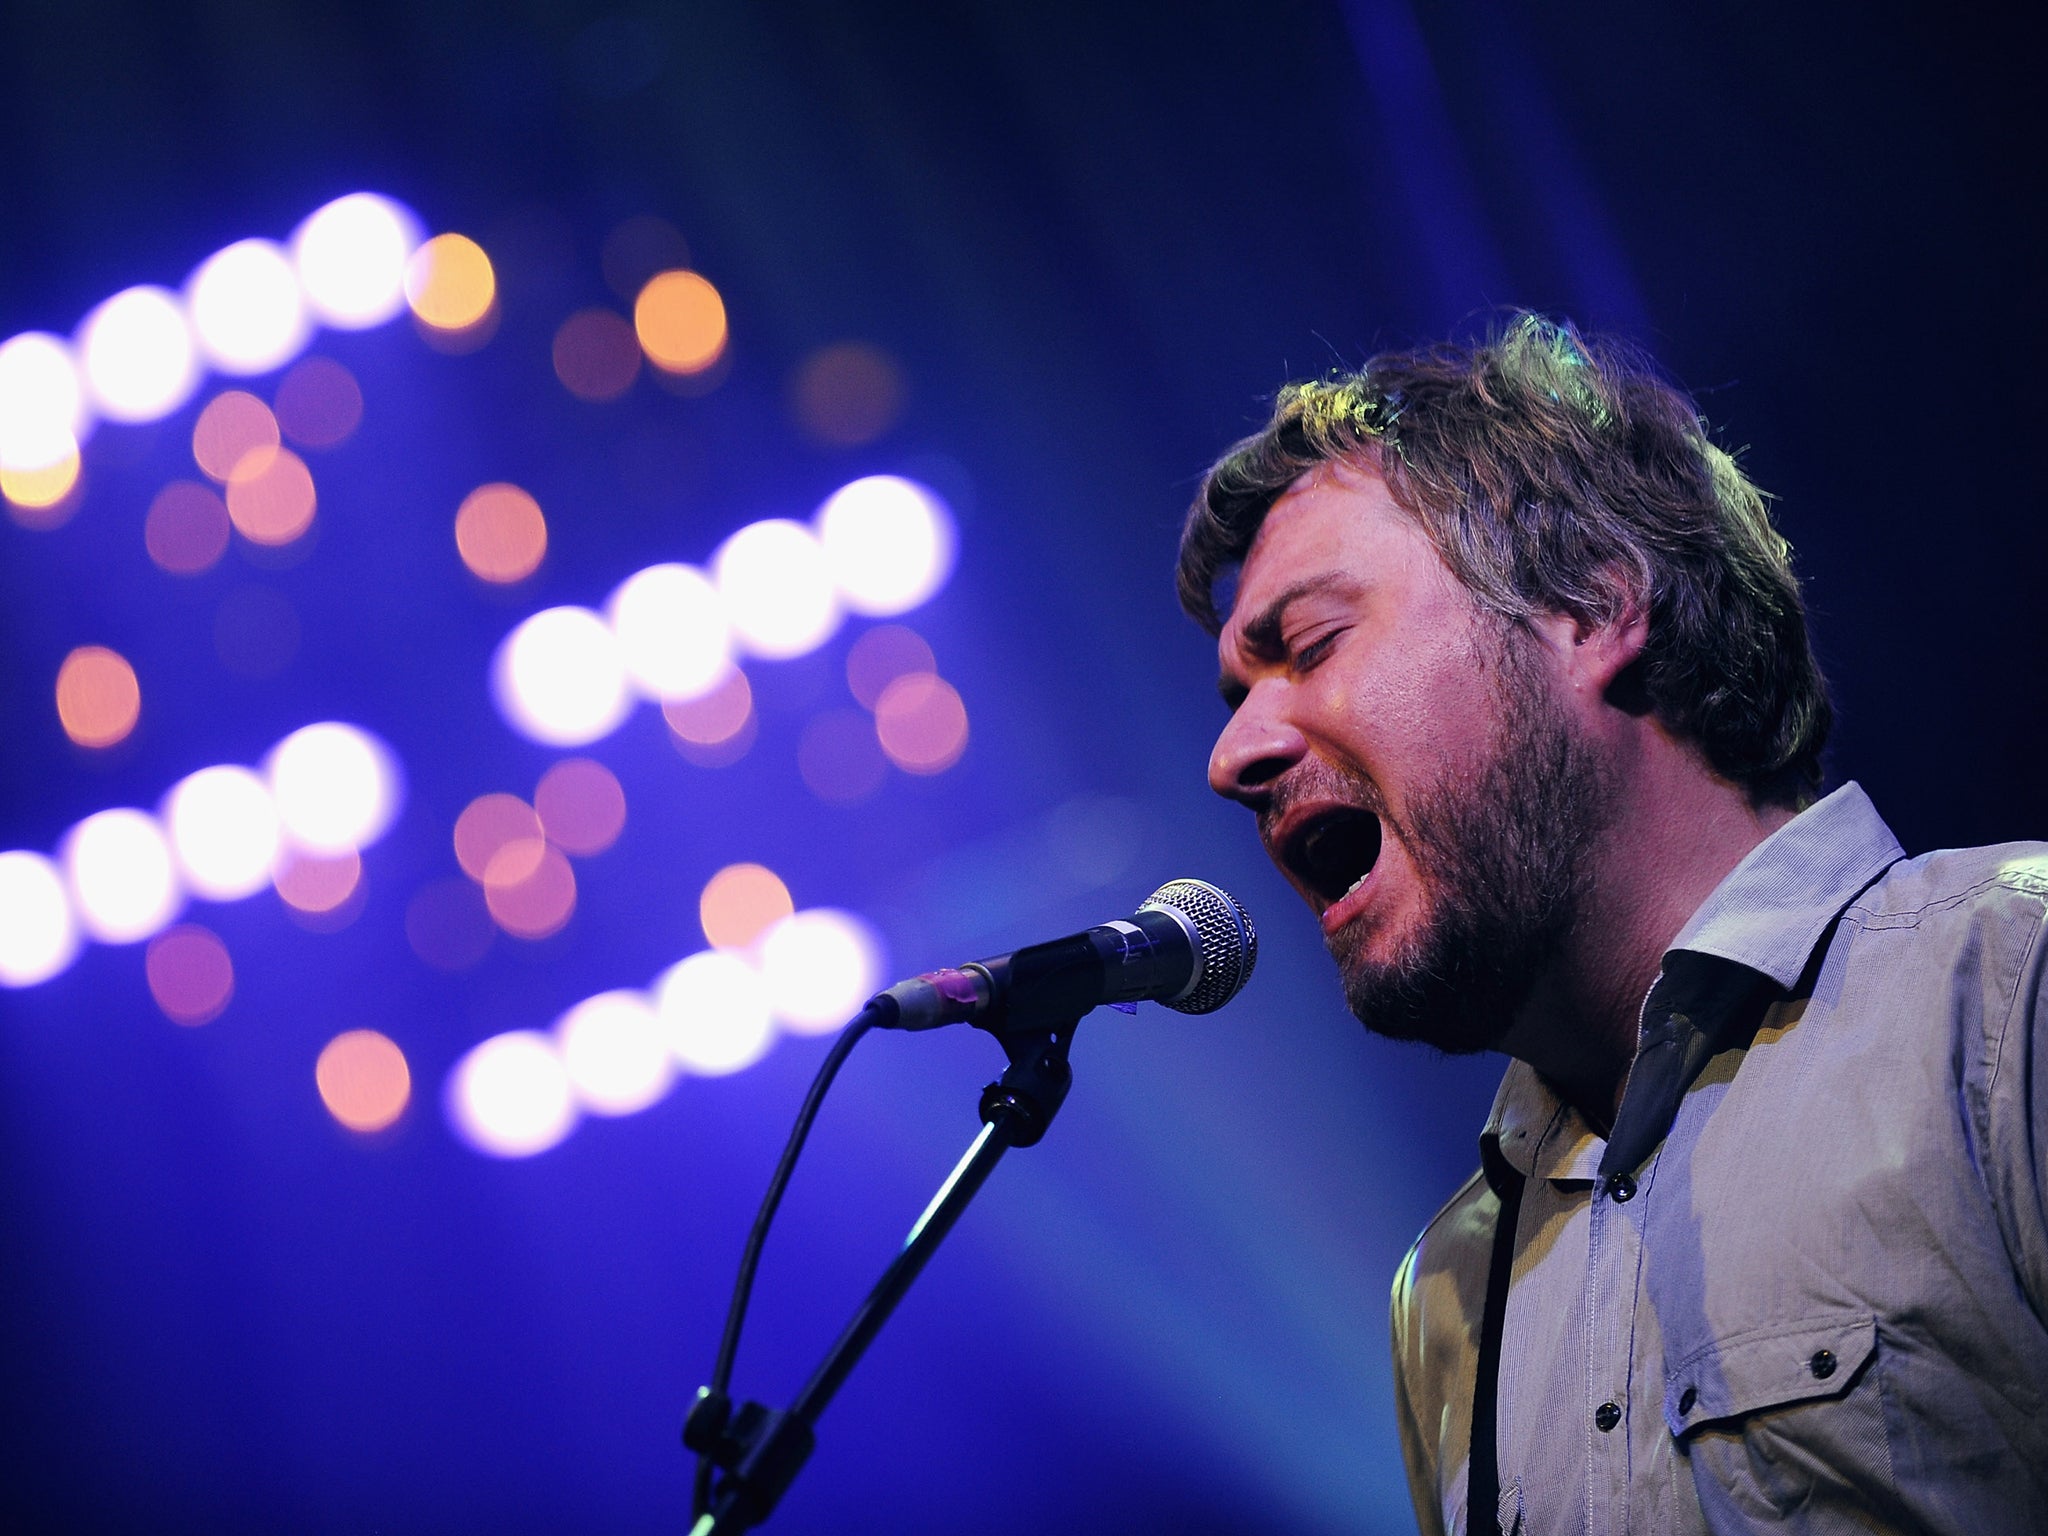 Lead singer of Doves, Jimi Goodwin, performs during the BBC Electric Proms in 2009